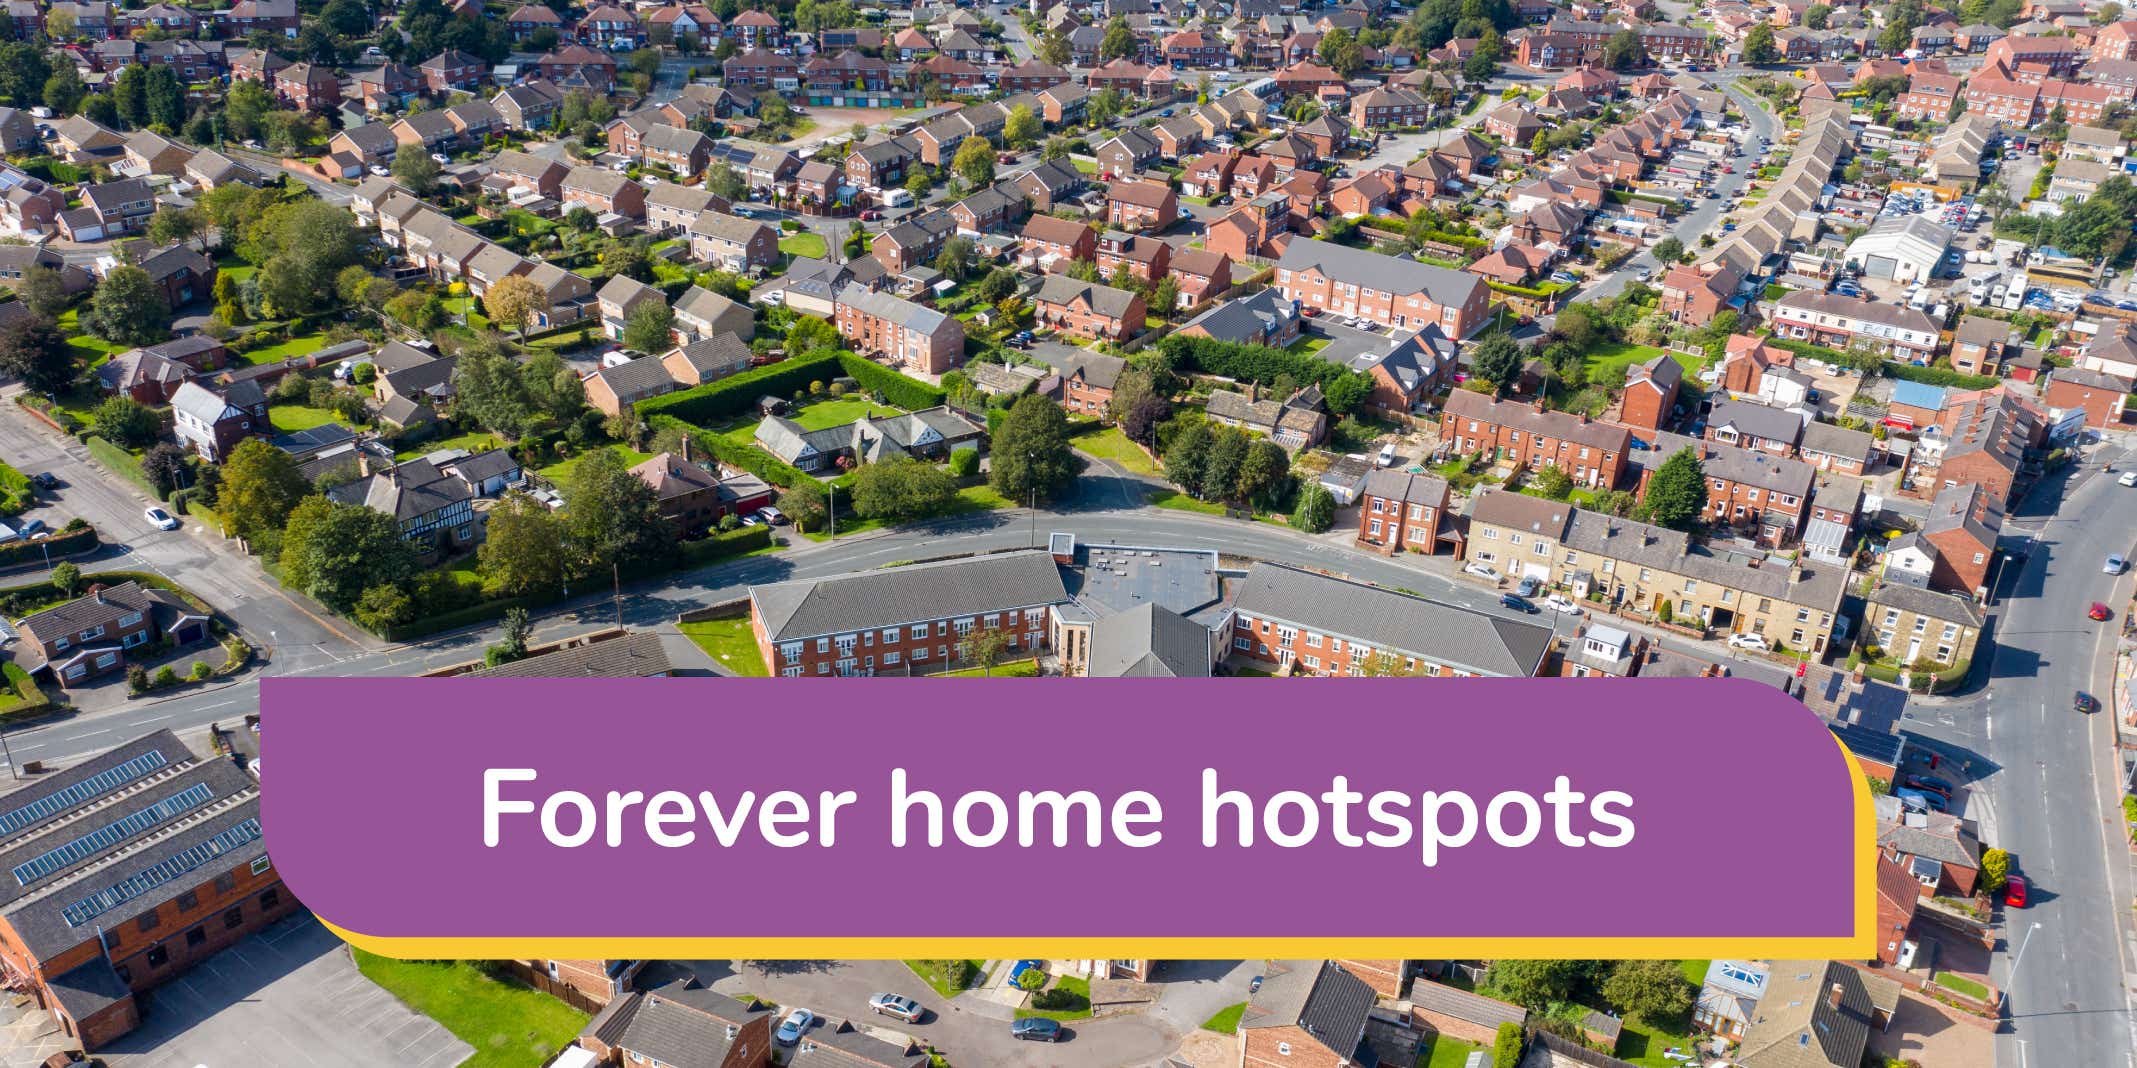  The UK's and USA's Forever Home Hotspots